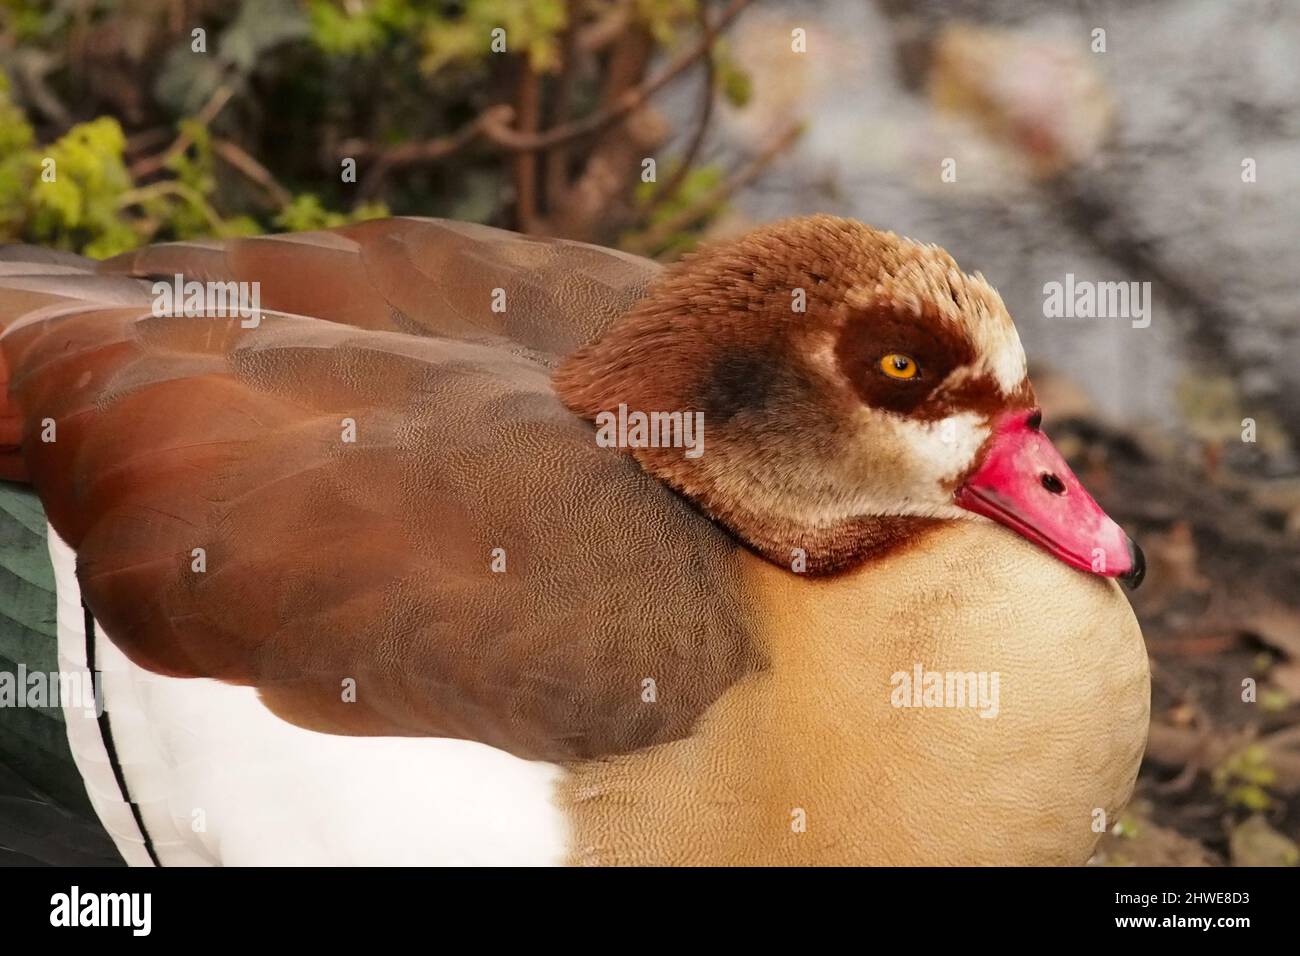 A close up view of the head and back of an Egyptian goose with its feathers fluffed up to keep warm Stock Photo